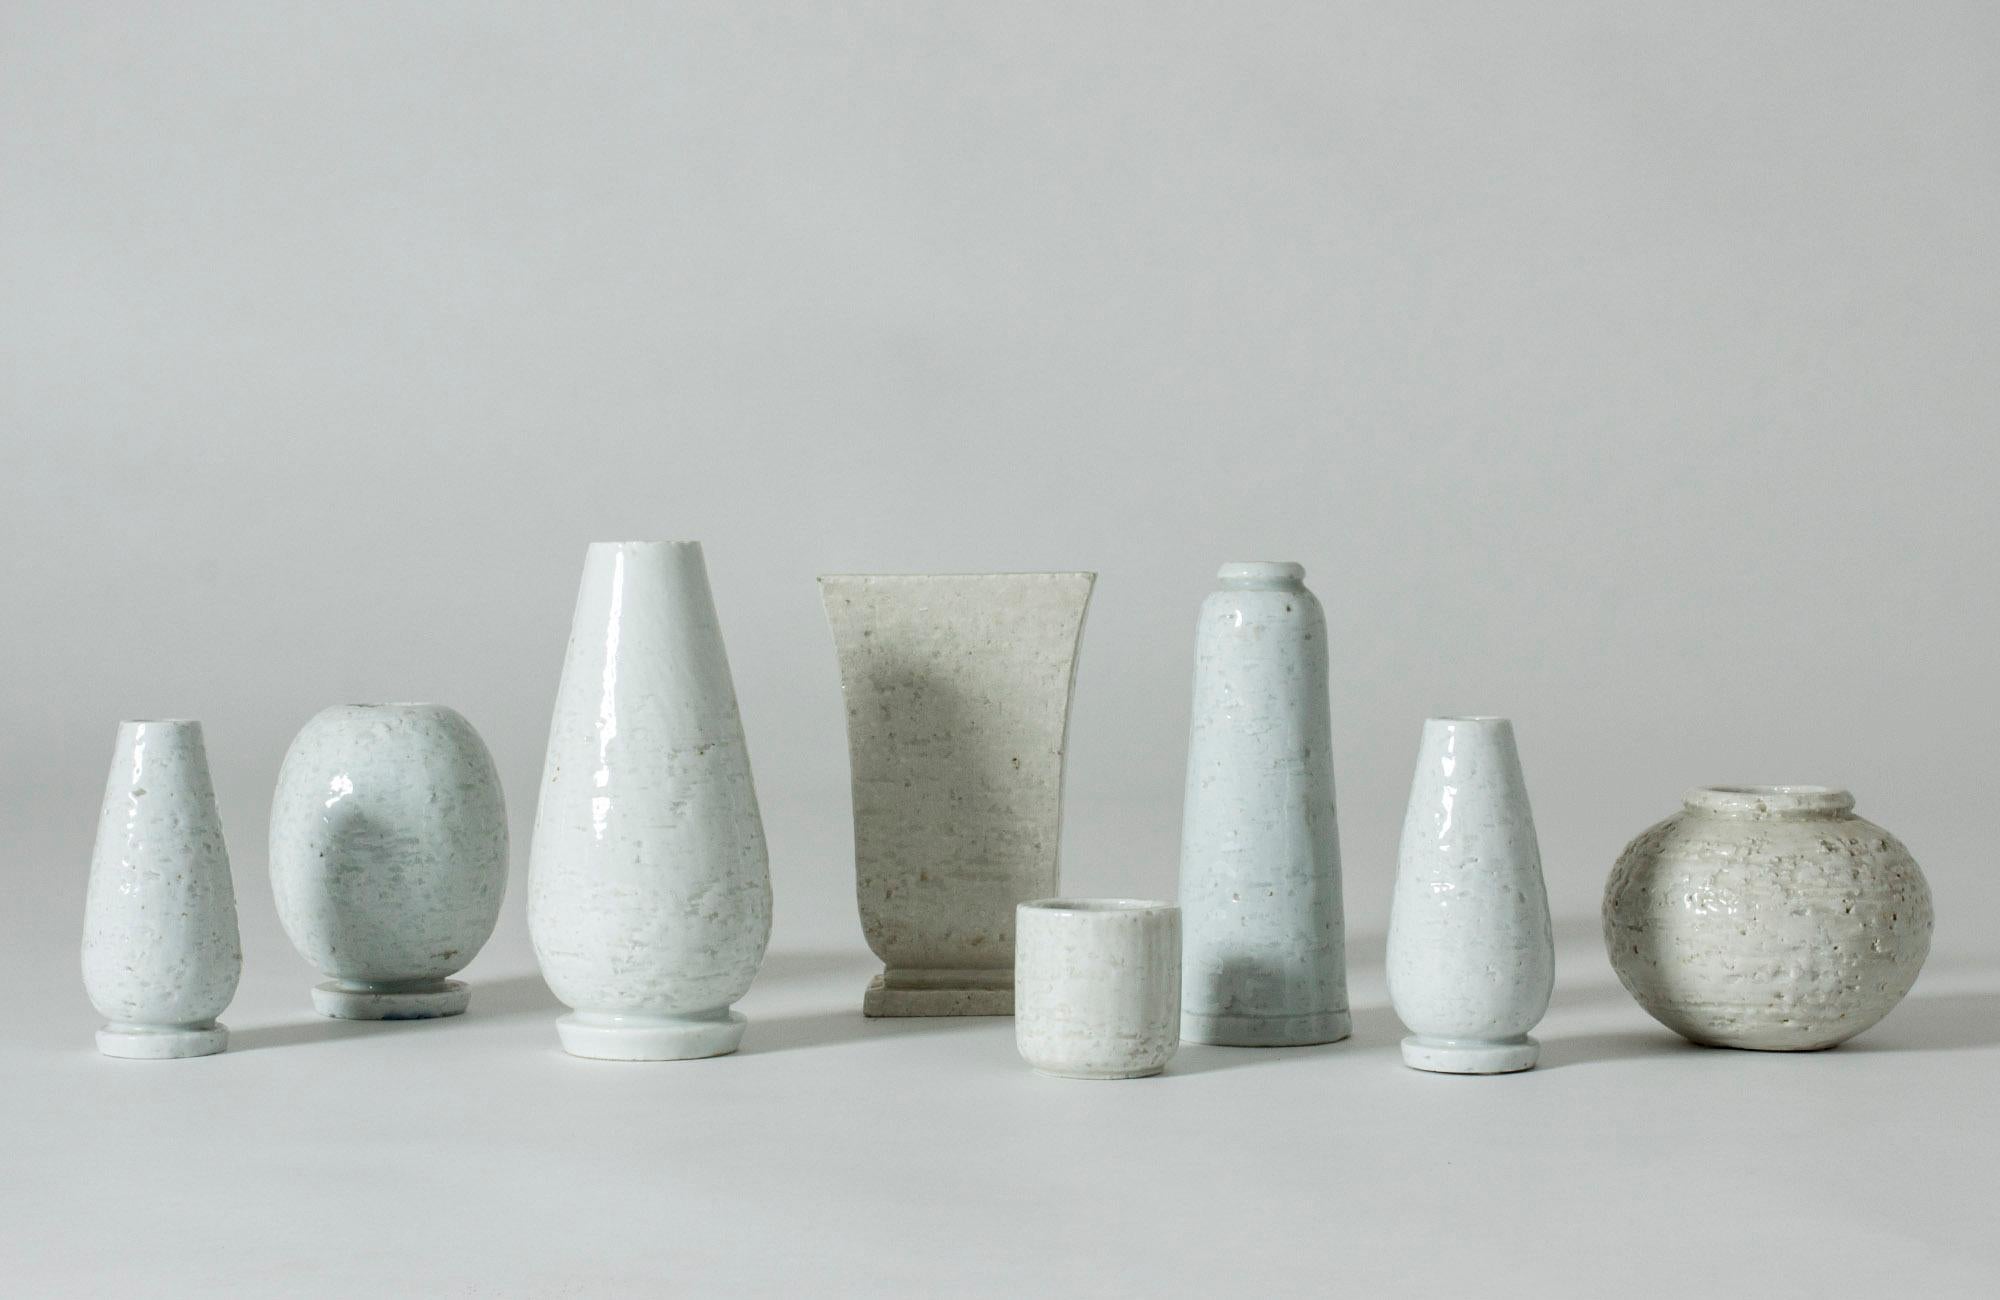 Set of eight amazing “Chamotte” stoneware vases by Gunnar Nylund, made in a technique where crushed earthenware is mixed into the stoneware. The series was introduced in 1936 and stood in contrast to the smooth forms otherwise popular at the time.